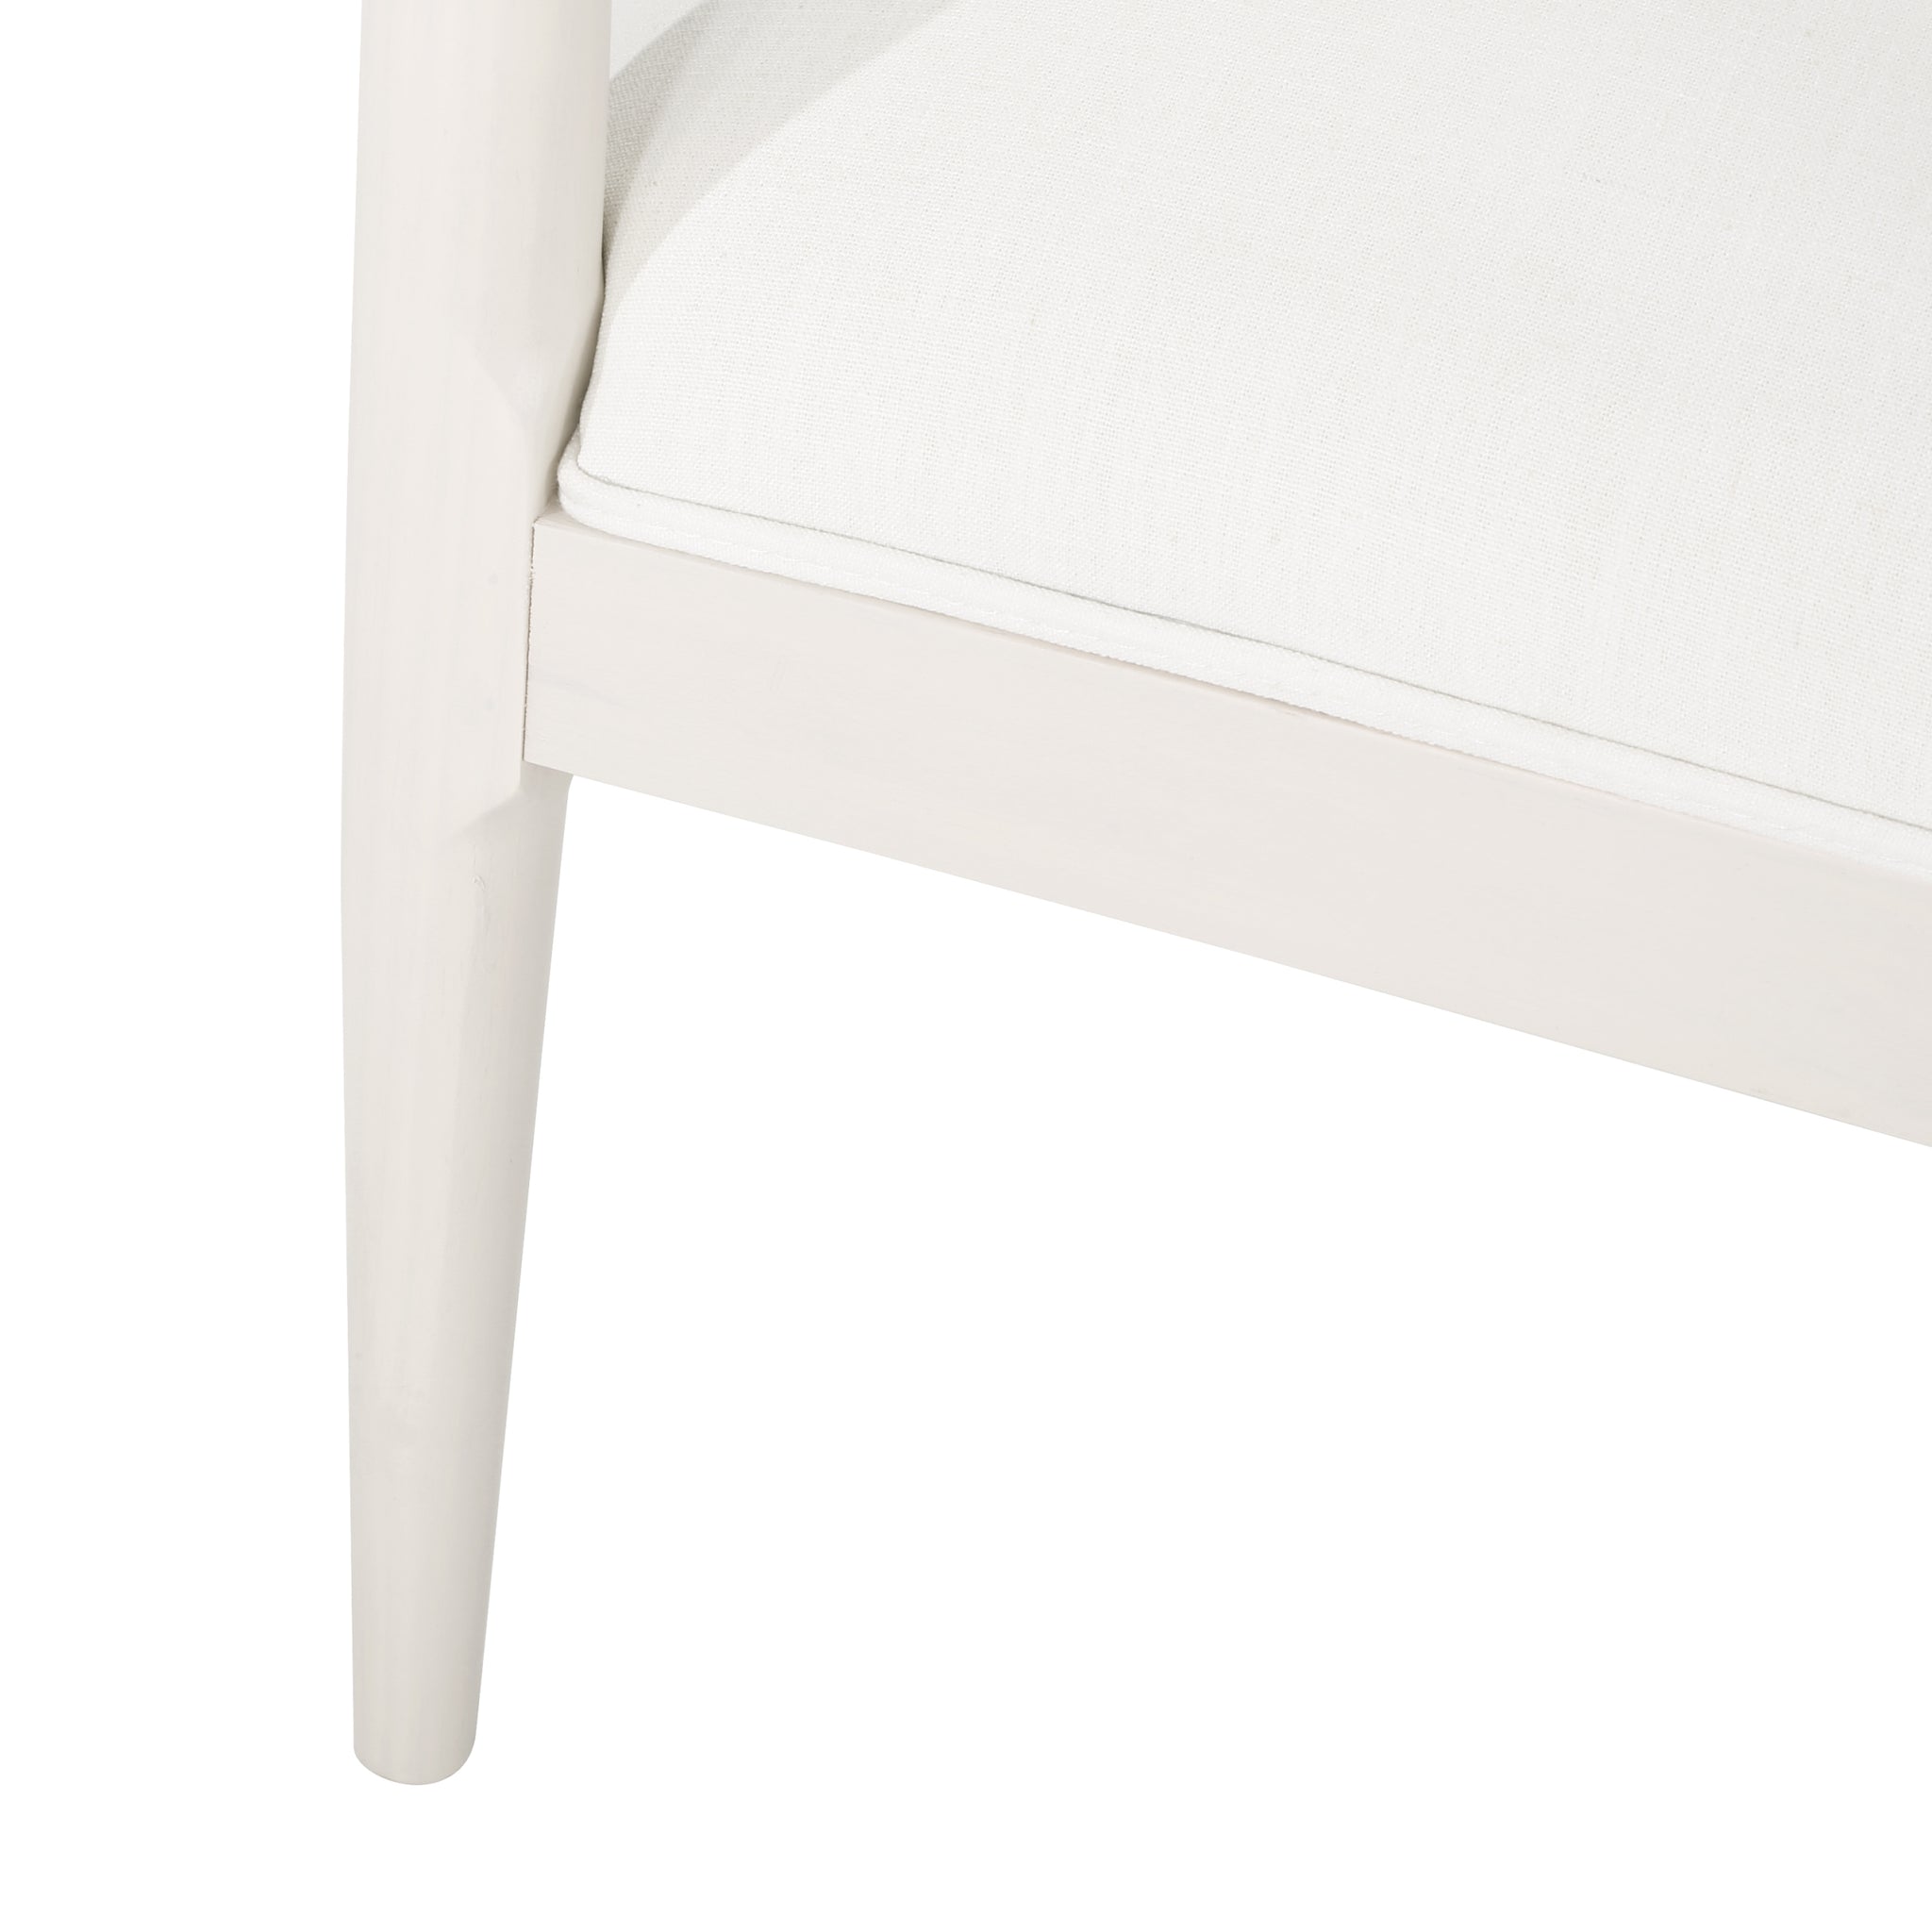 DINING CHAIR white-fabric